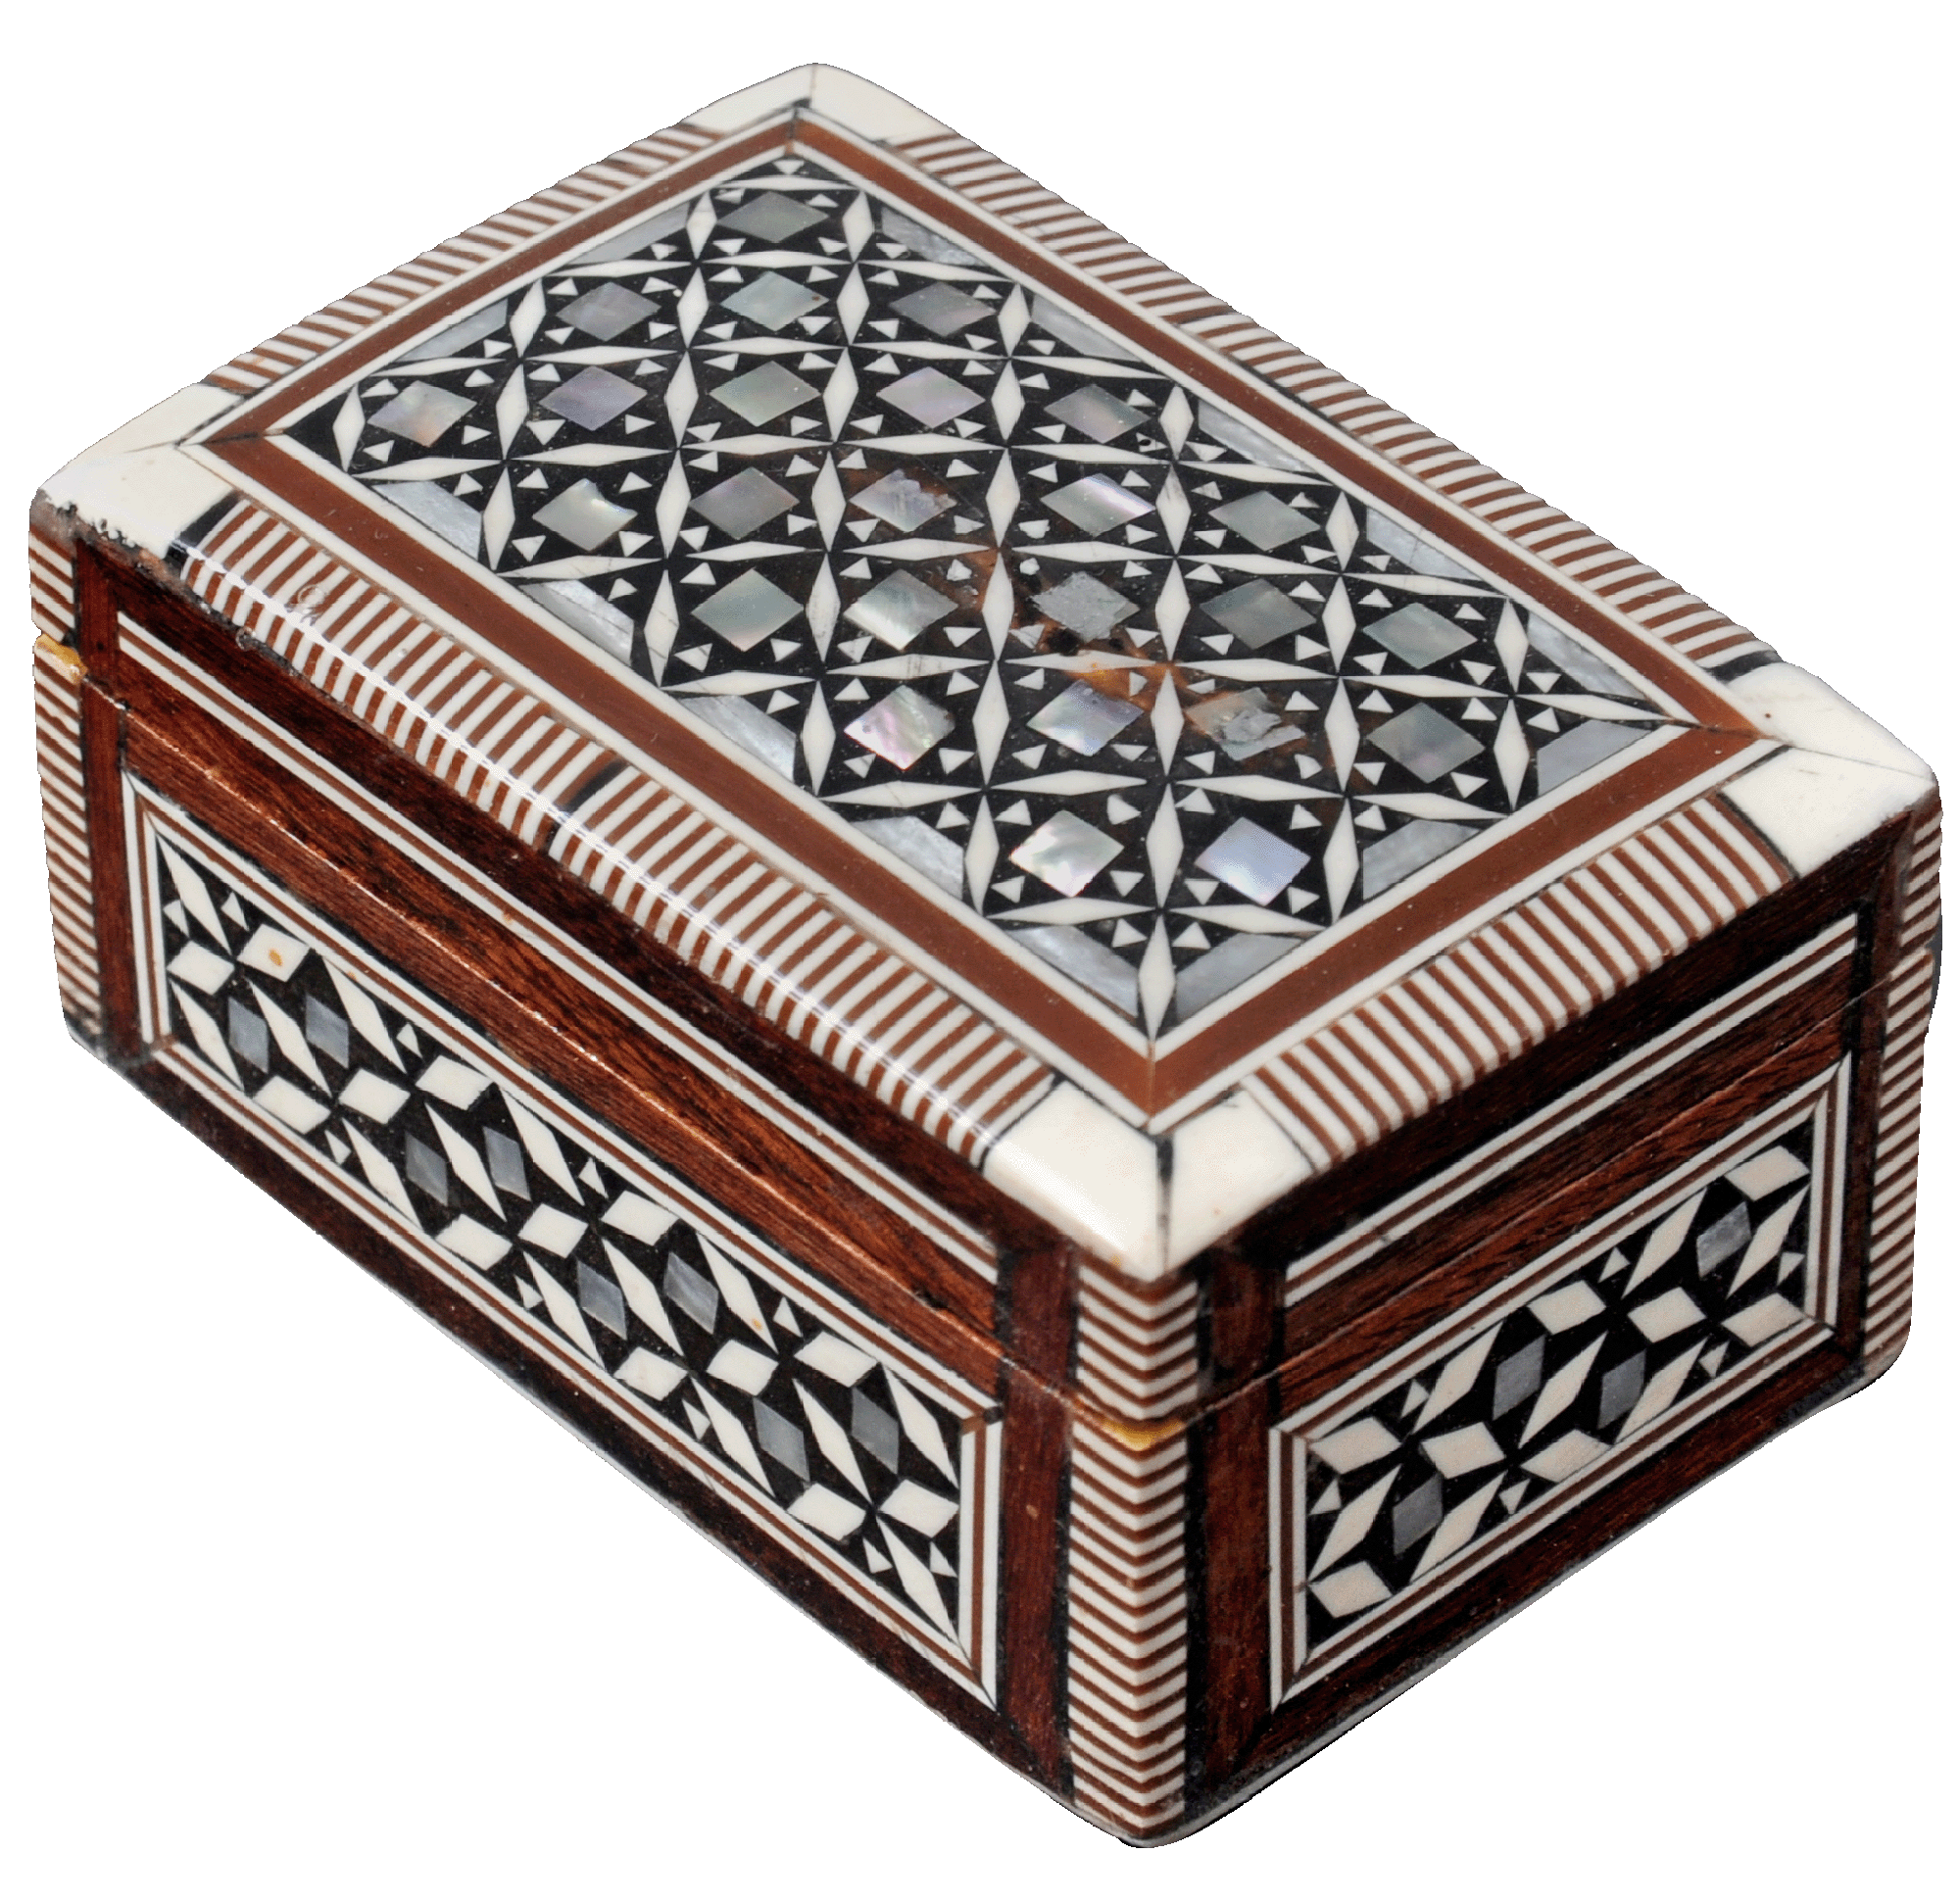 Egyptian Mosaic Jewelry Trinket Box Mother of Pearl BX2 - Click Image to Close